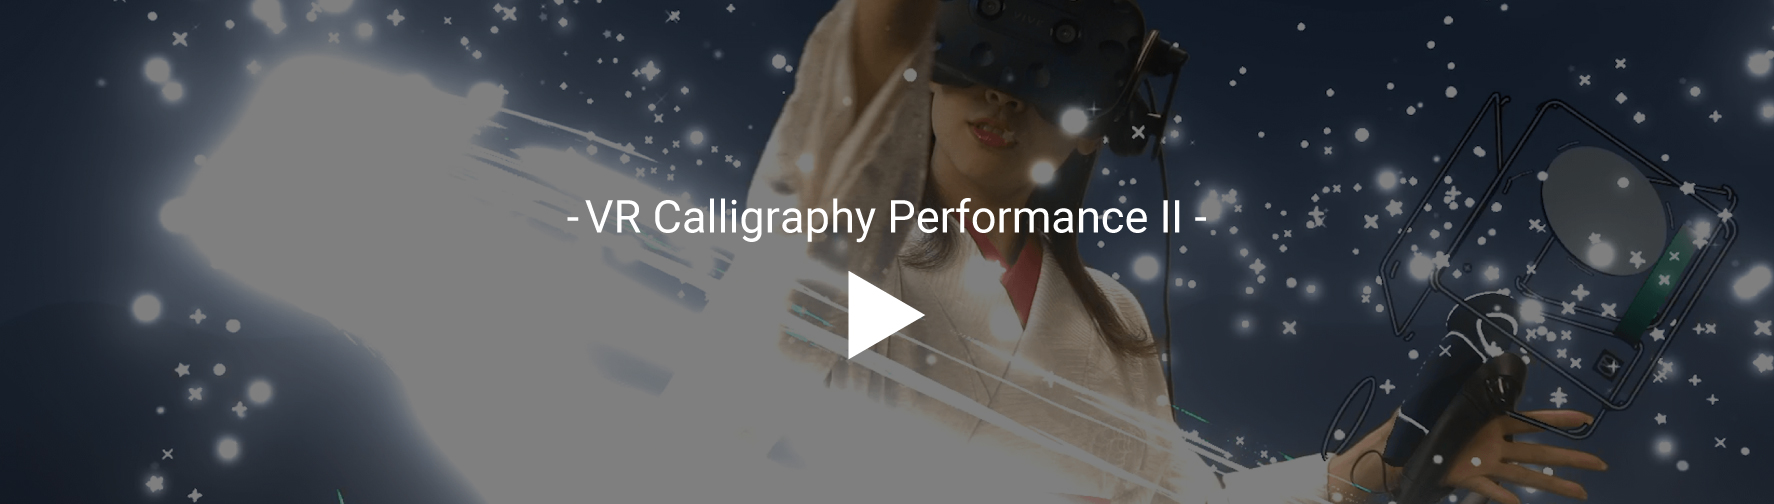 VR Calligraphy Performance